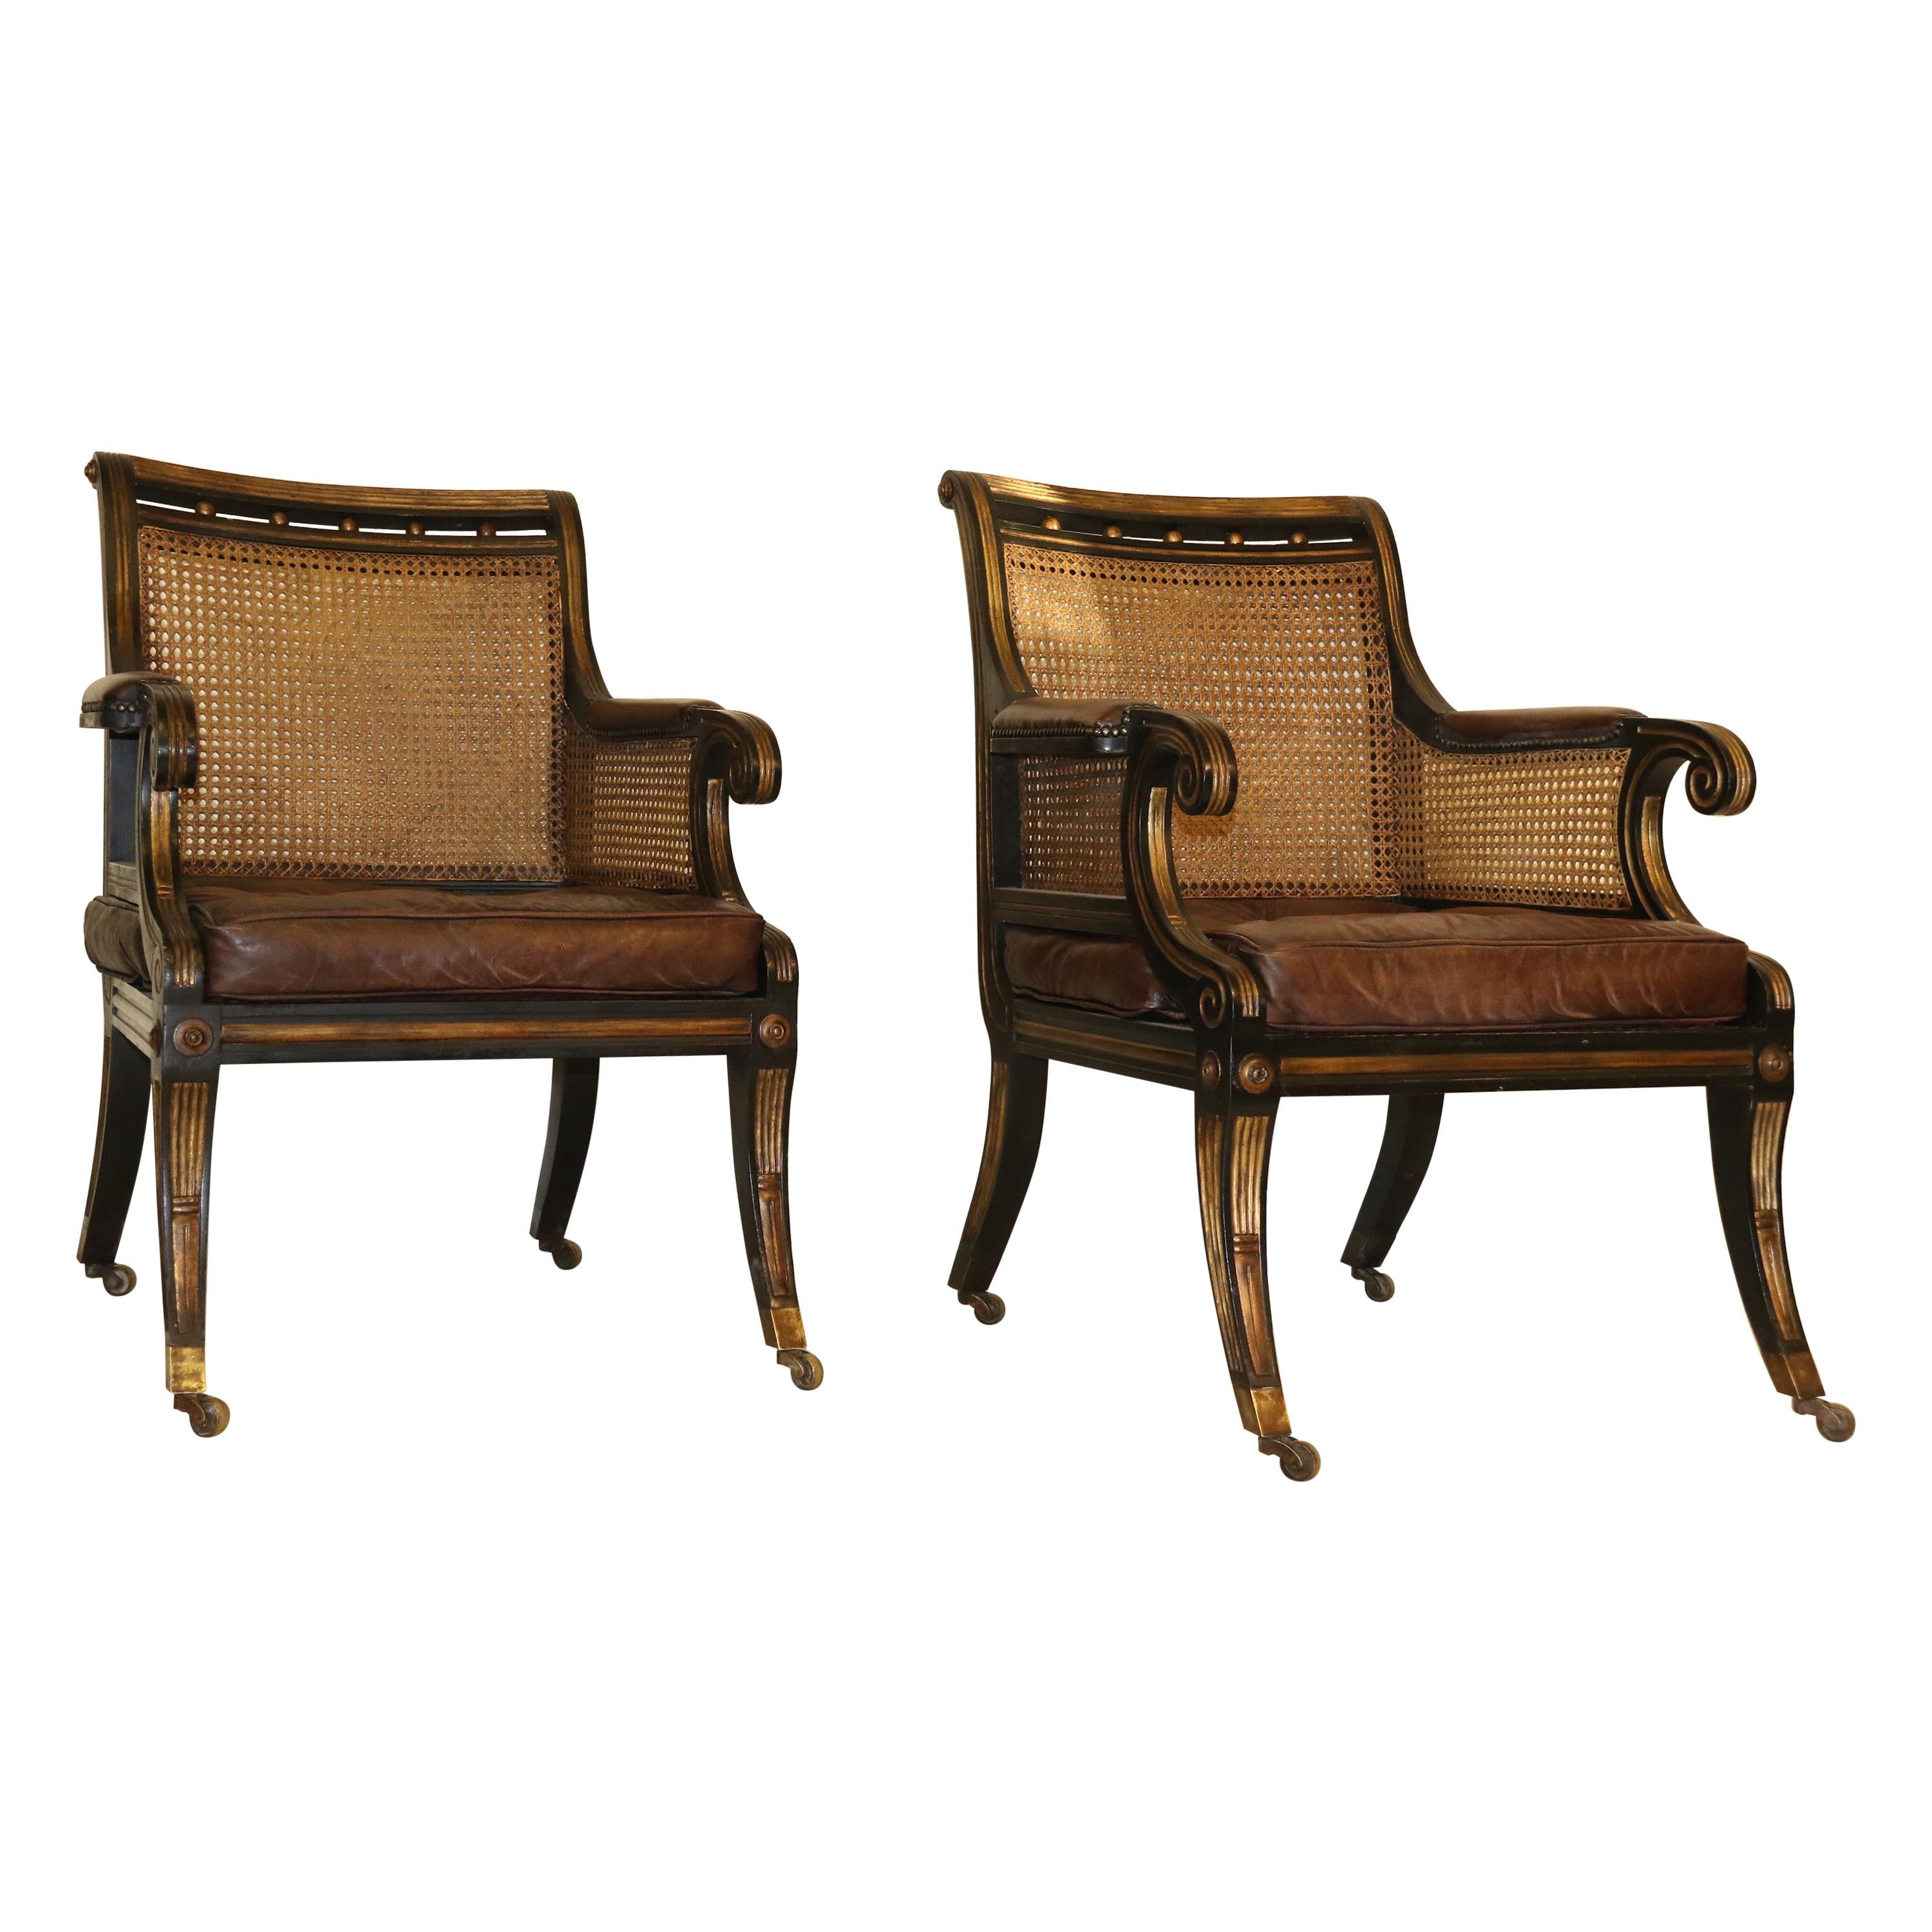 Pair of English Regency Style Ebonized and Gilt Library Chairs For Sale